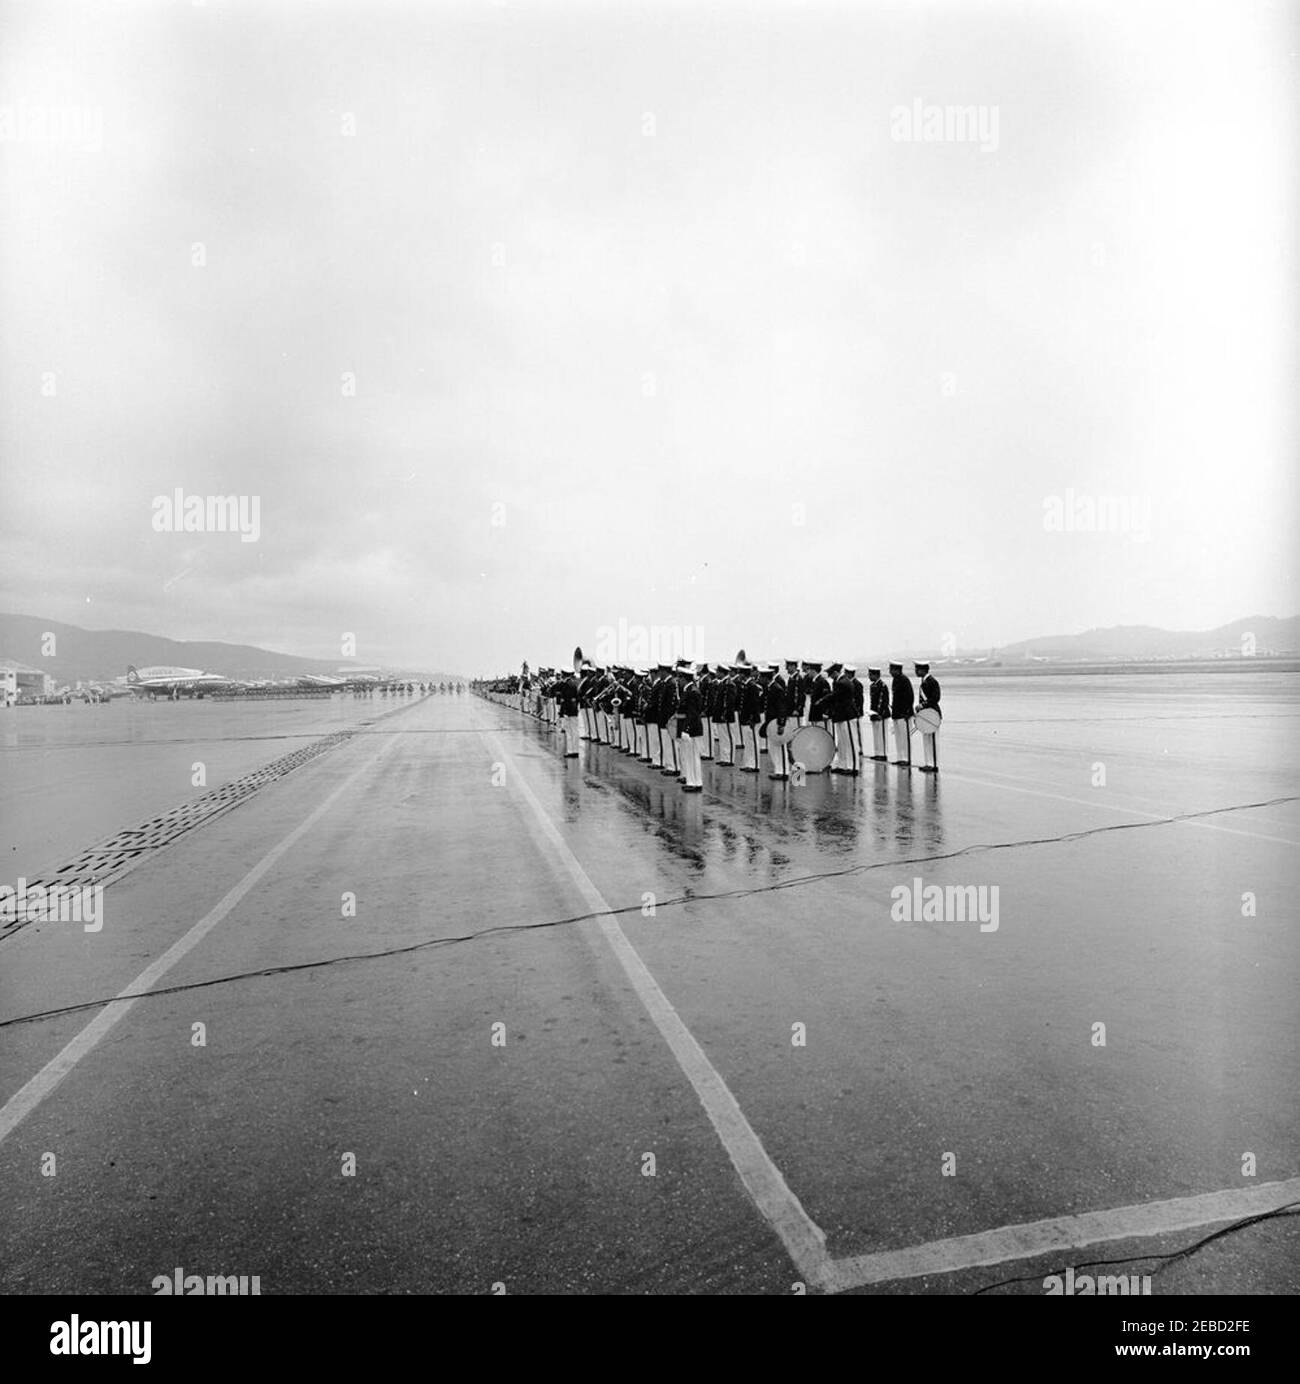 Trip to South America: Caracas, Venezuela, arrival, 9:00AM. Members of a Venezuelan military band stand in formation at Maiquetu00eda International Airport in Caracas, Venezuela, for the arrival of President John F. Kennedy and First Lady Jacqueline Kennedy. [Photograph by Harold Sellers] Stock Photo